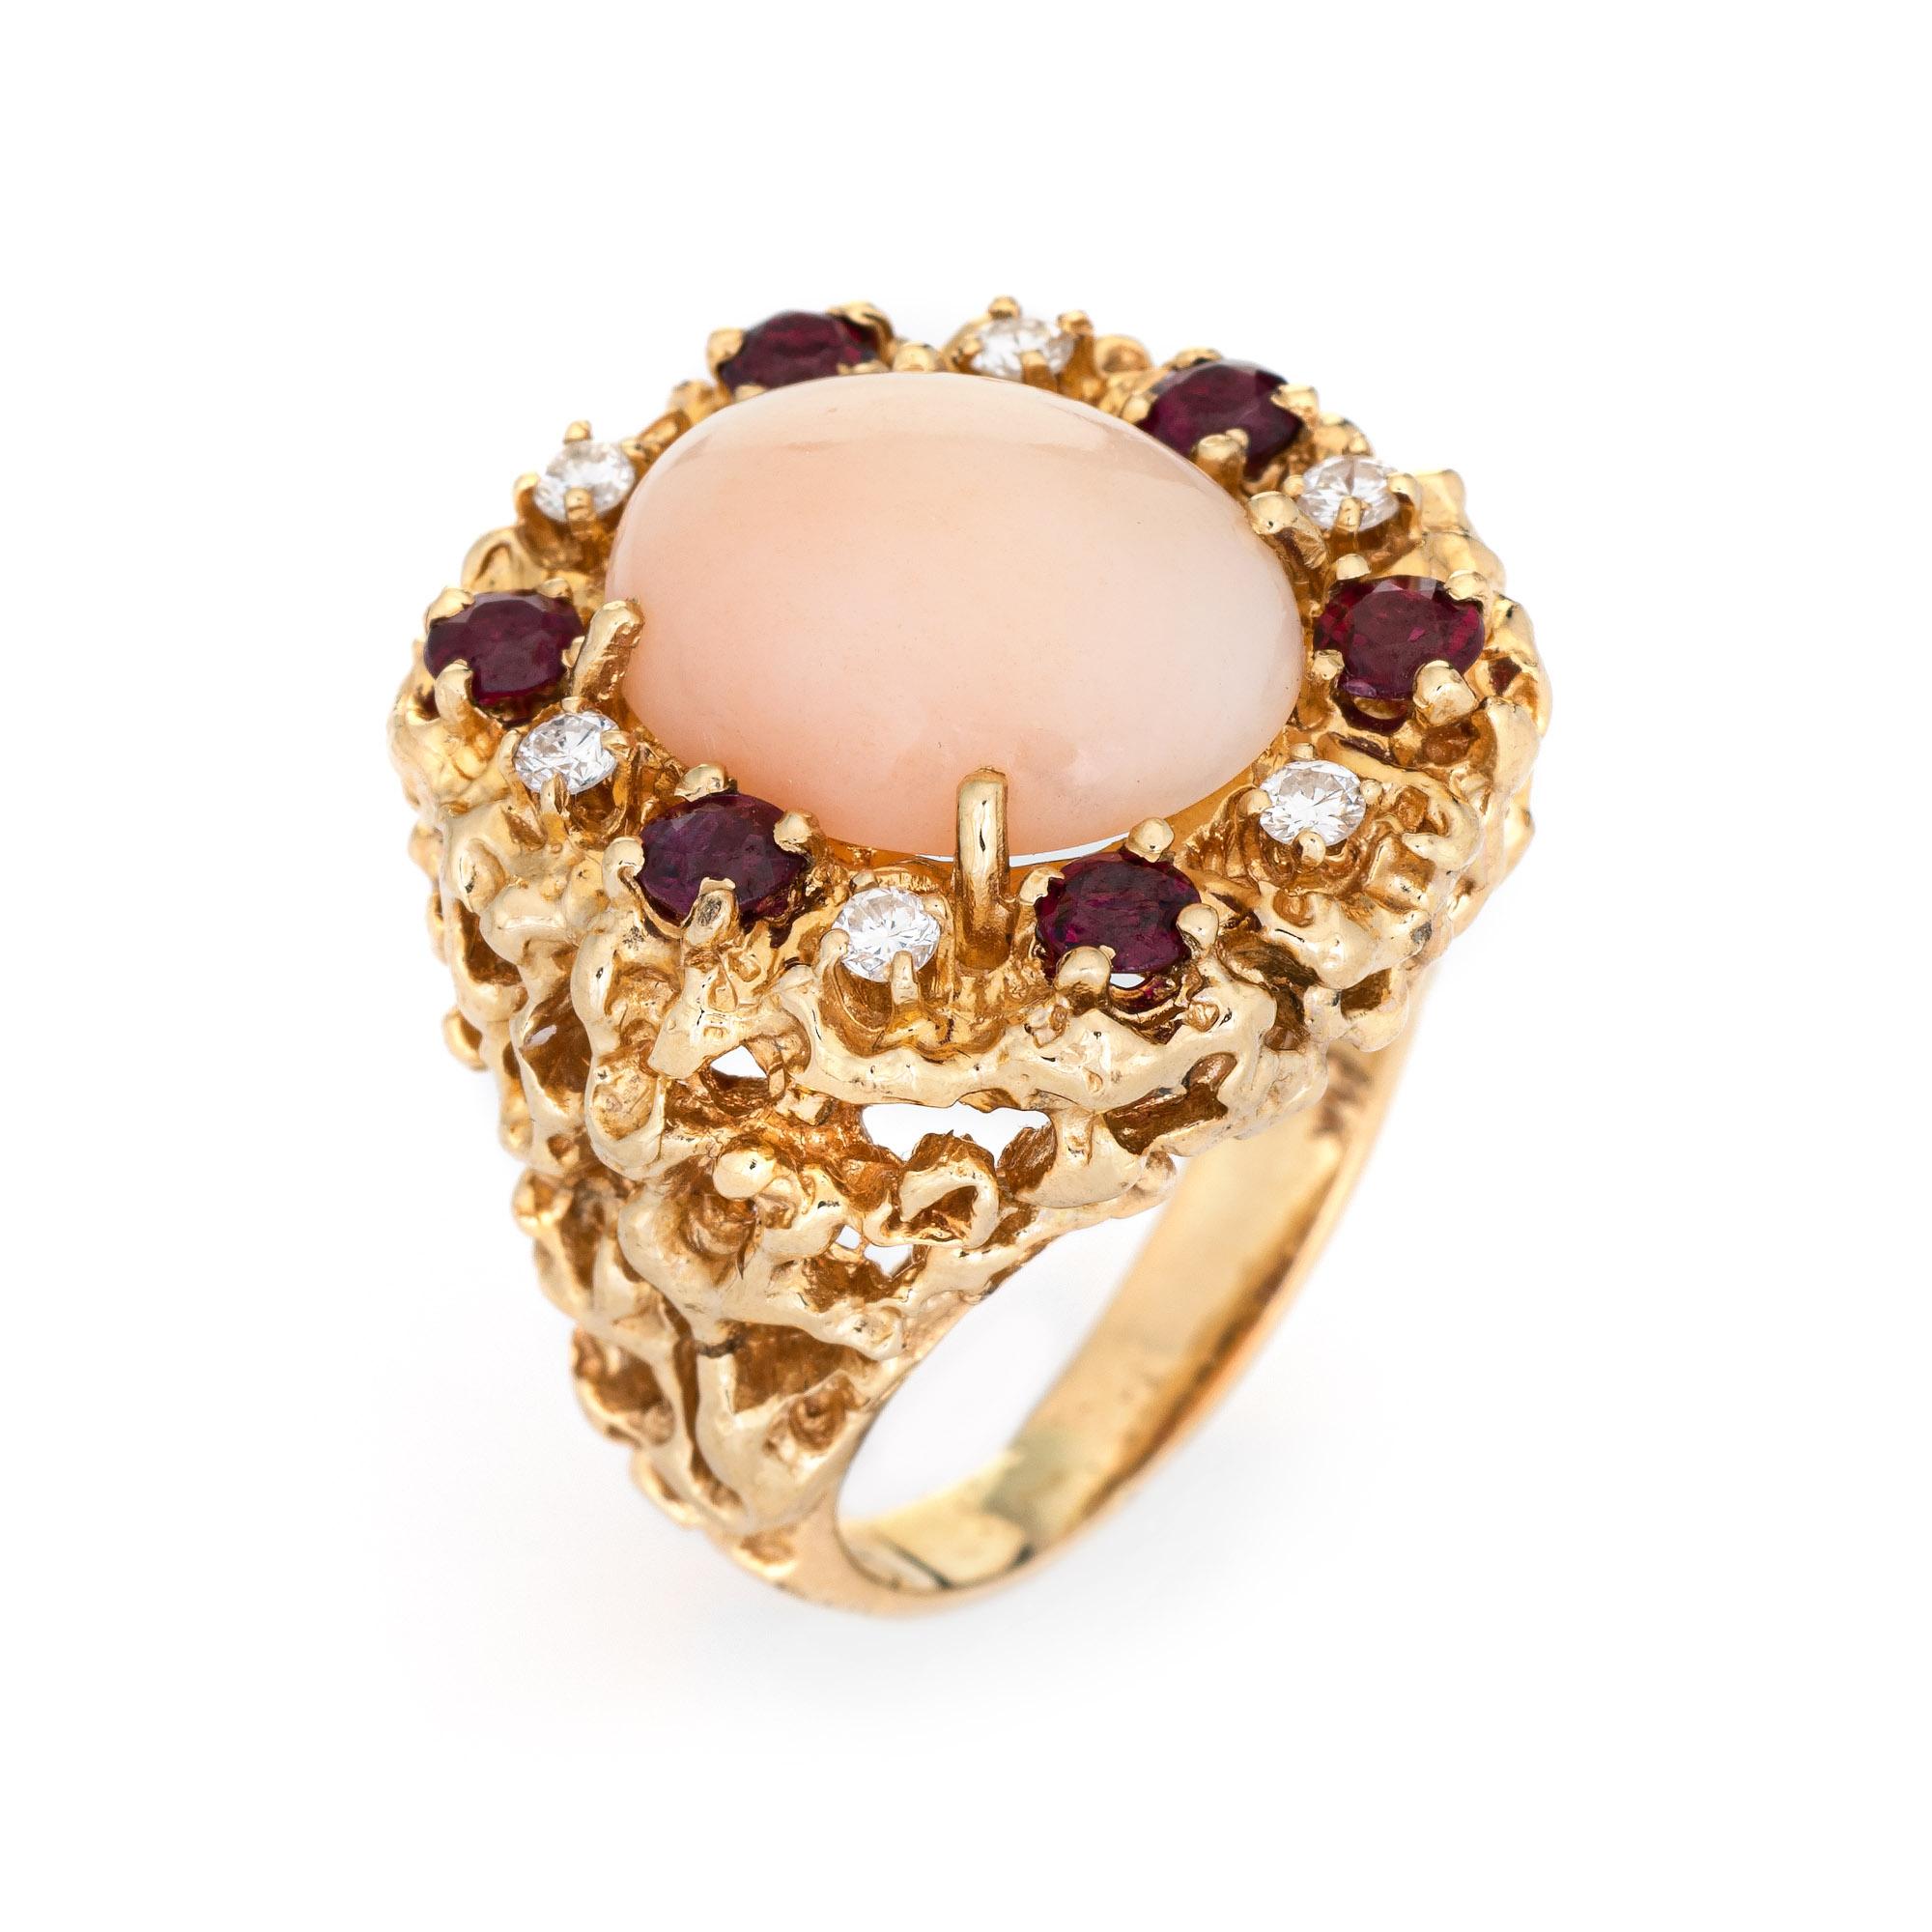 Stylish vintage angel skin coral, ruby & diamond ring (circa 1970s) crafted in 14 karat yellow gold. 

Cabochon cut angel skin coral measures 15mm x 12mm (estimated at 8.50 carats). The coral is in very good condition and free of cracks or chips.